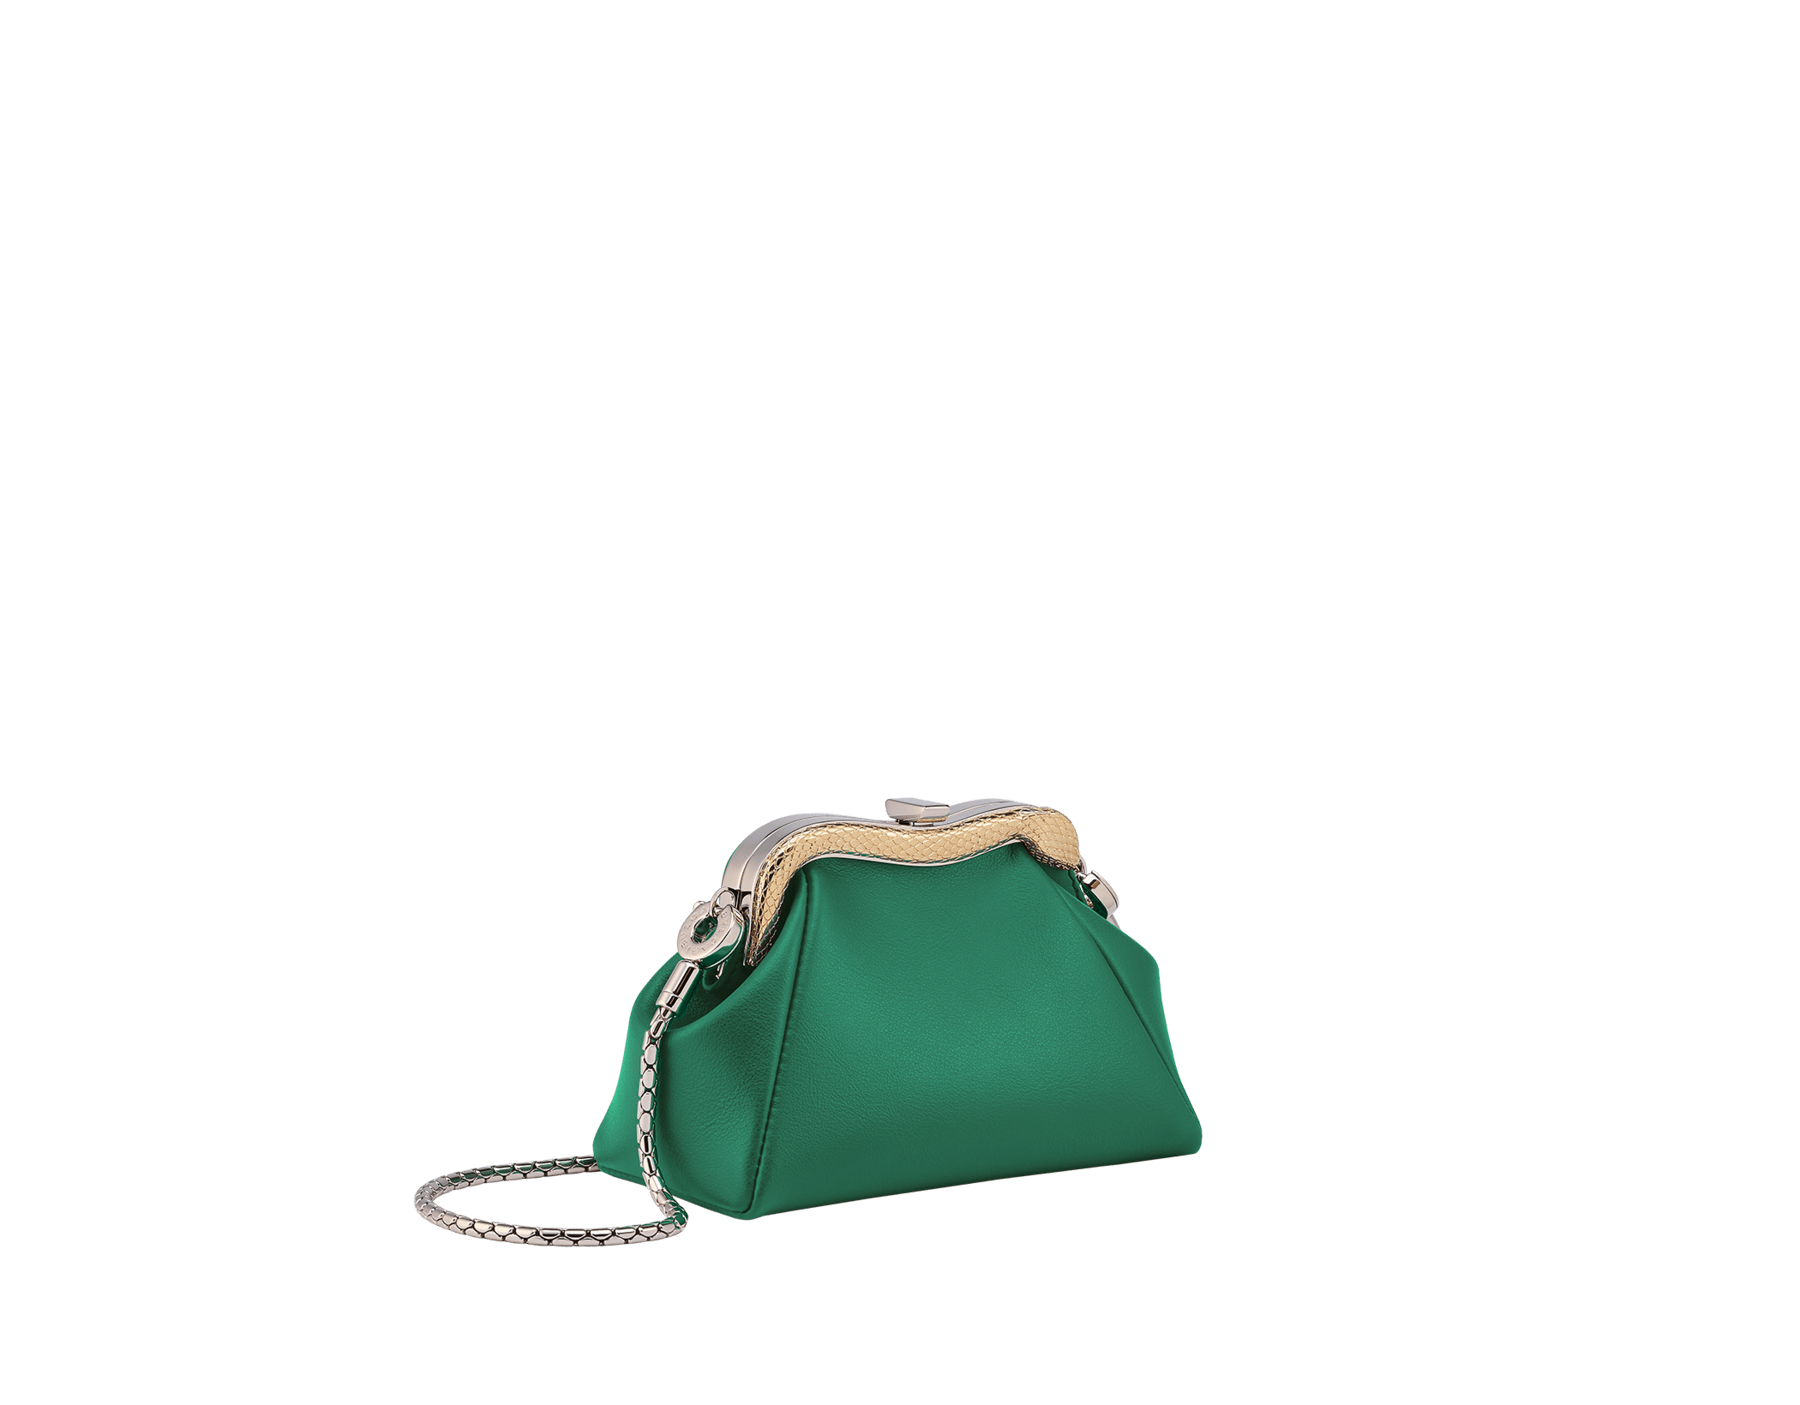 Serpentine micro pouch bag in smooth emerald green calf leather with amethyst purple nappa leather lining. Captivating snake body-shaped frame in light gold-plated brass embellished with engraved scales and red enamel eyes on one side and an emerald green smooth calf leather insert on the other, with press-stud closure. SEA-NANOSERPENTIN image 1